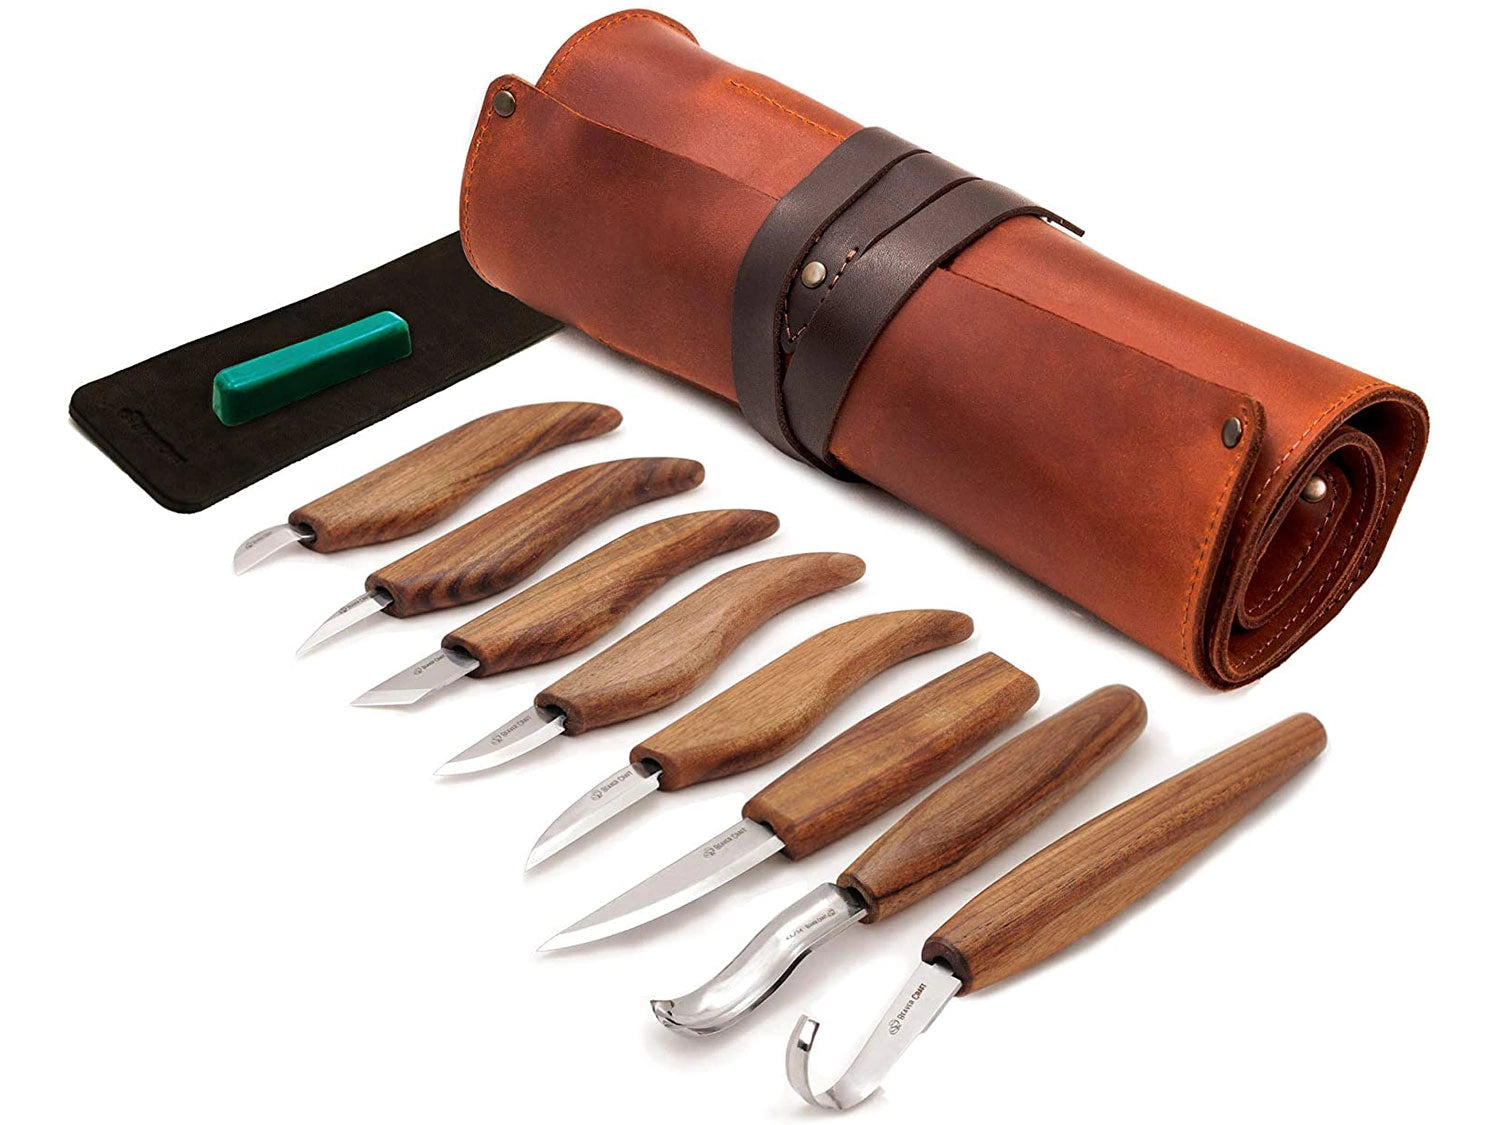 BeaverCraft Deluxe Wood Carving Kit S18X - Wood Carving Knife Set - Spoon Carving Tools Set - Whittling Knives Kit - Woodworking Kit Wood Carving